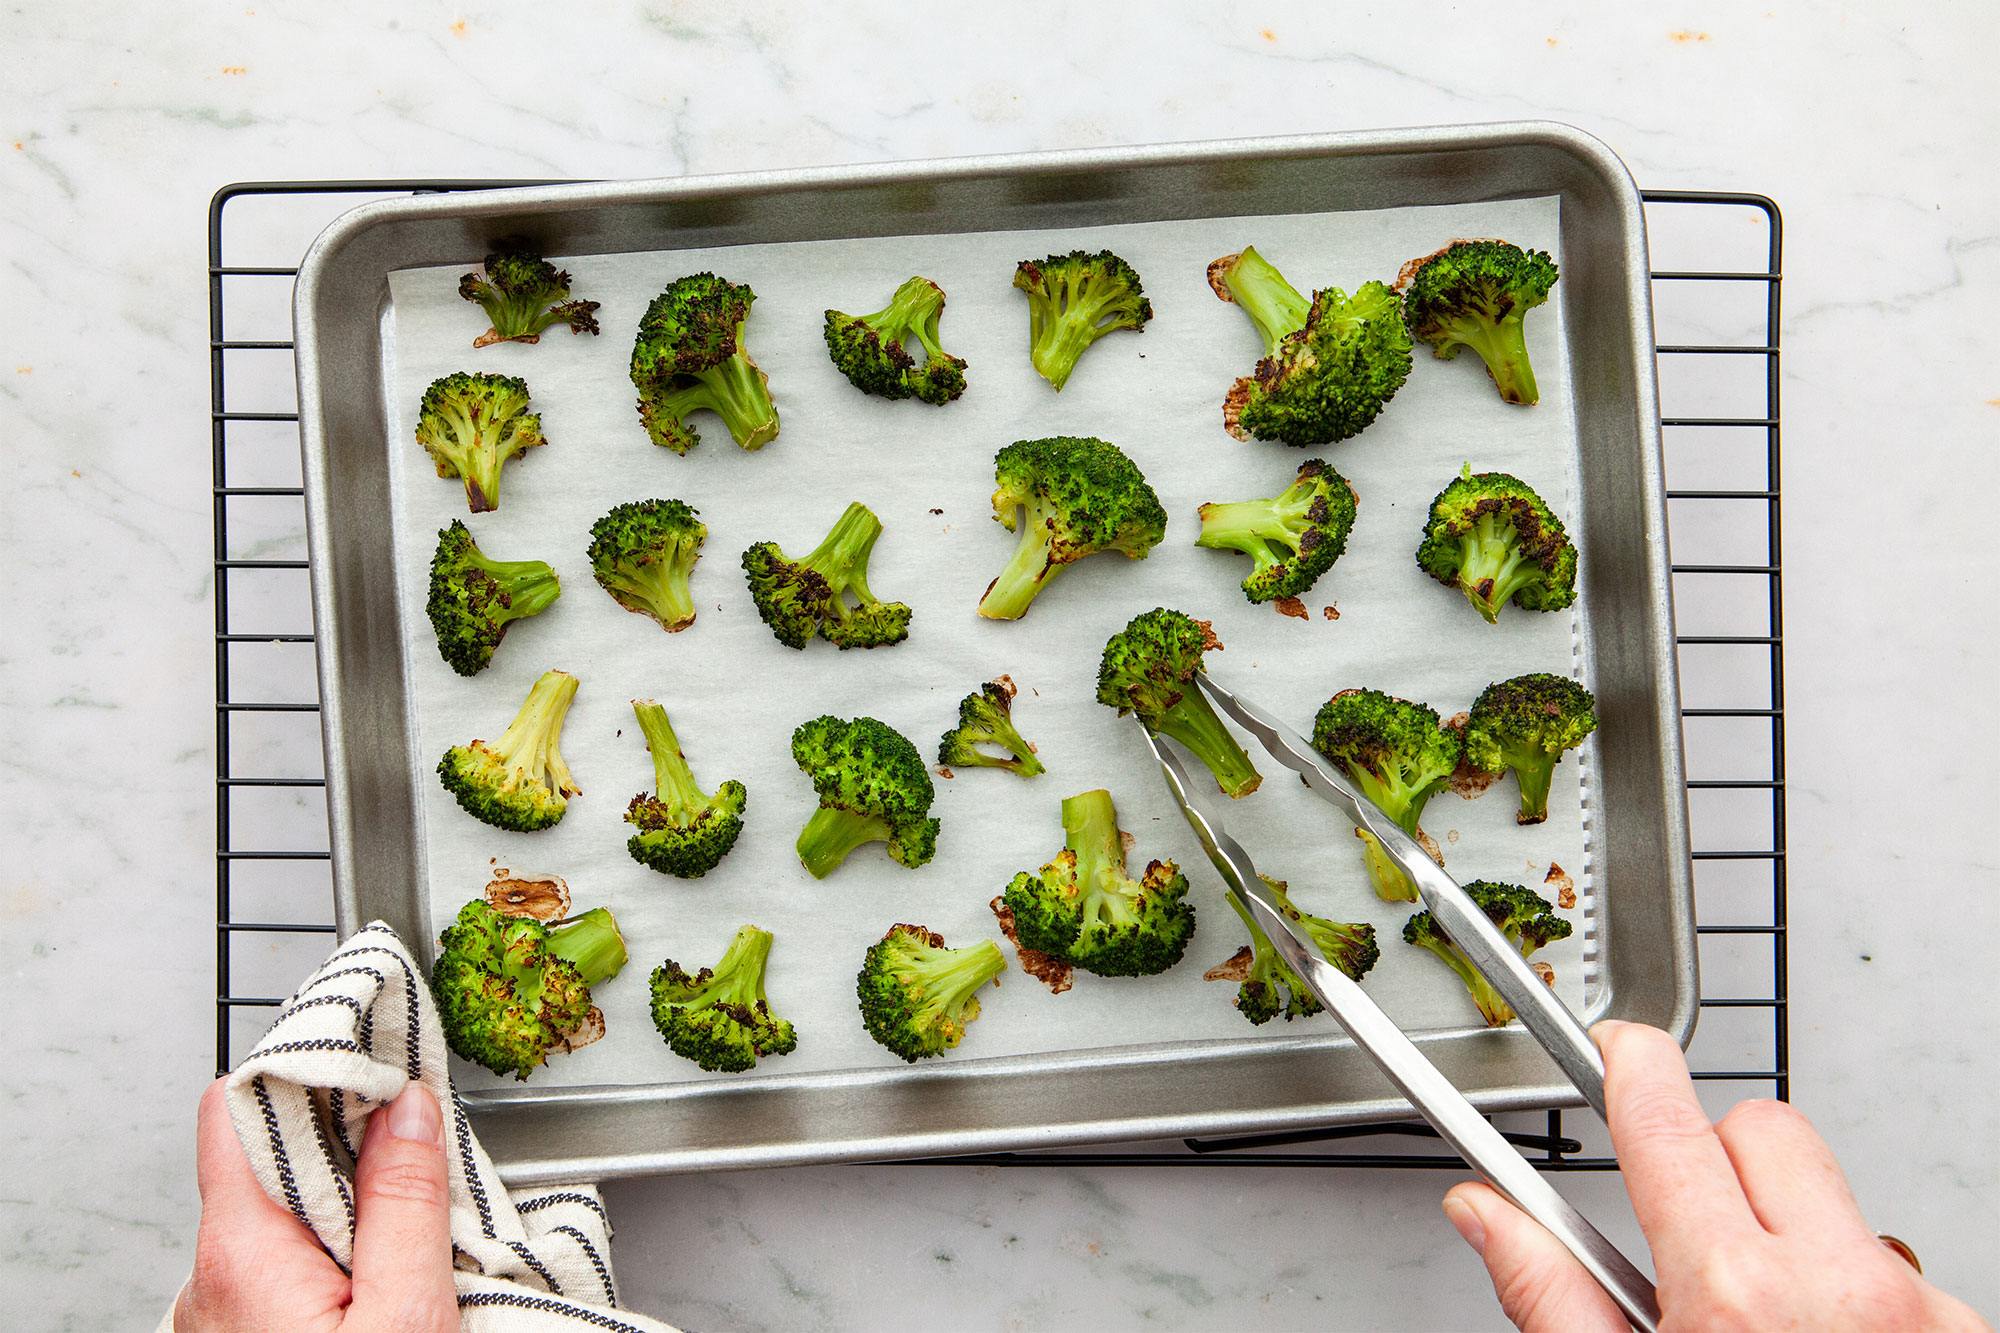 Roasting the broccoli on its own sheet pan.